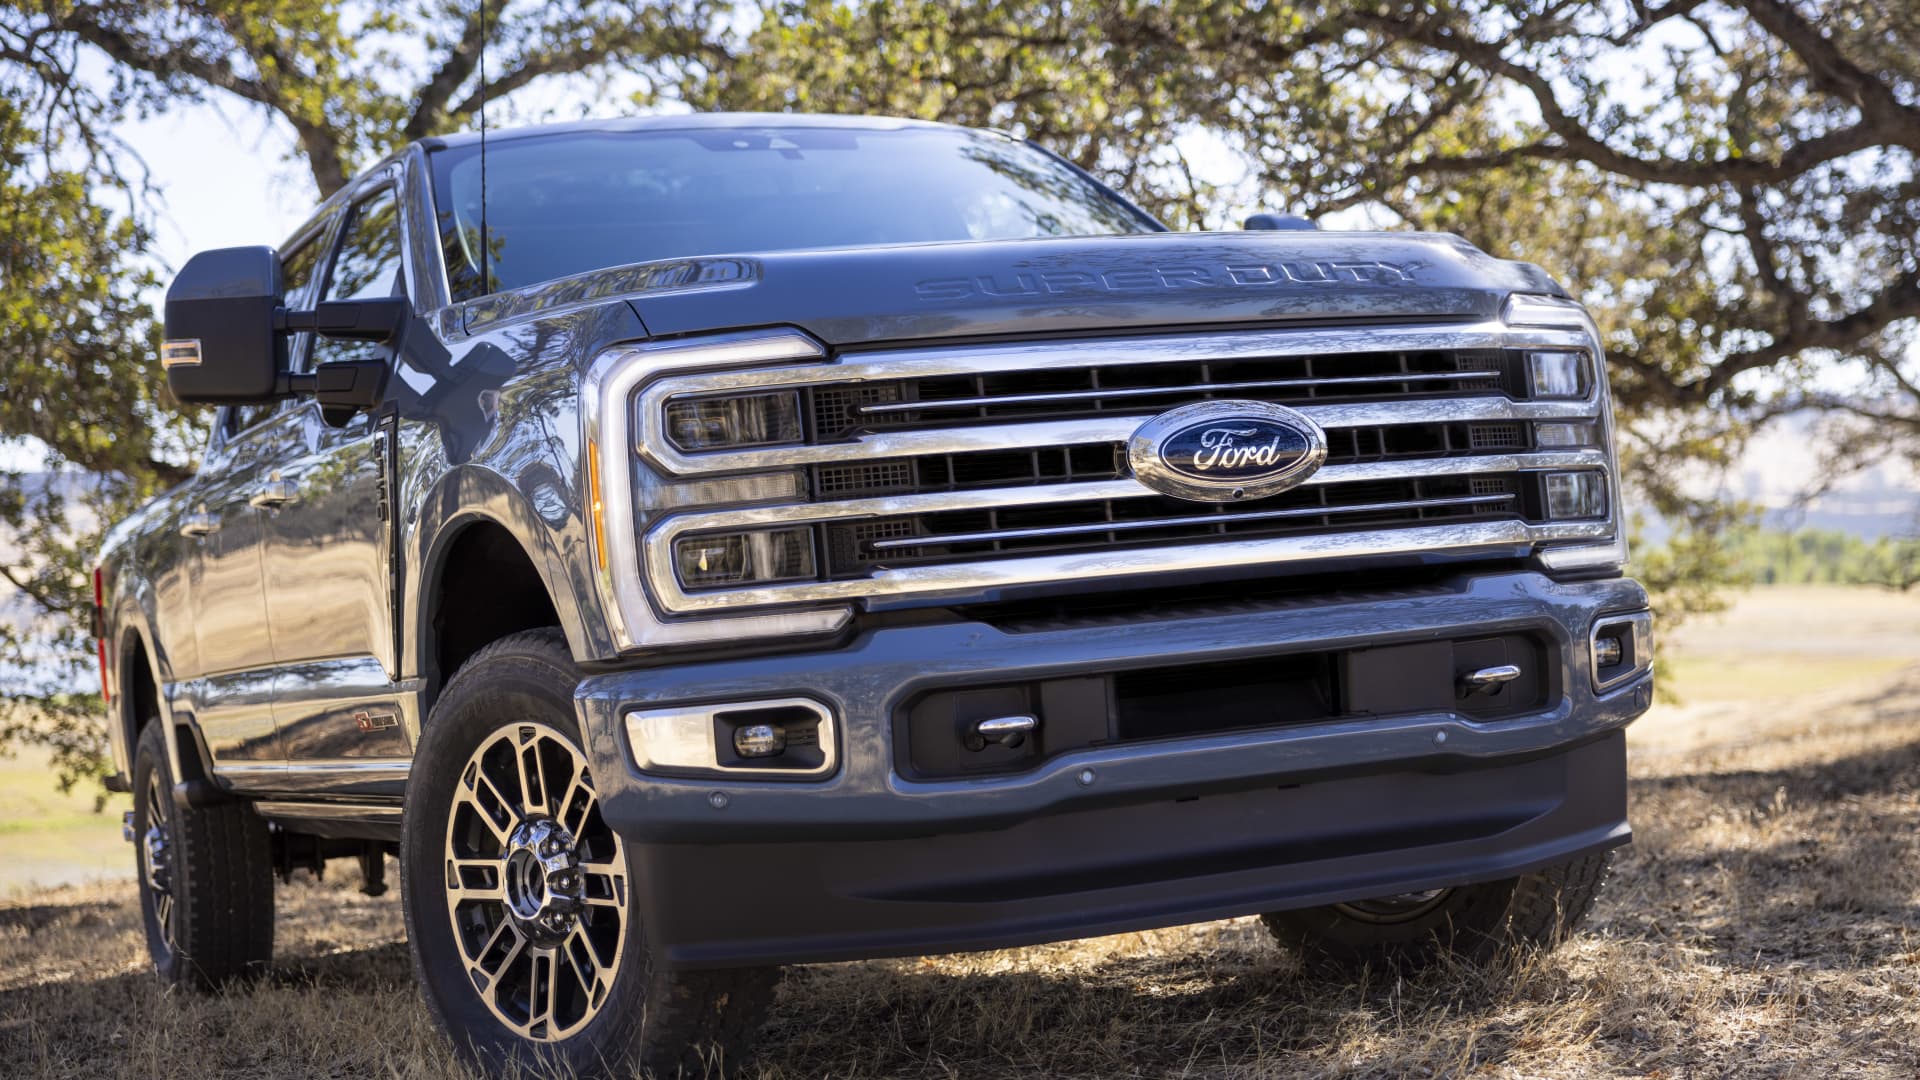 Ford reveals third-quarter net loss, weighed down by supply chain problems and Argo AI investment